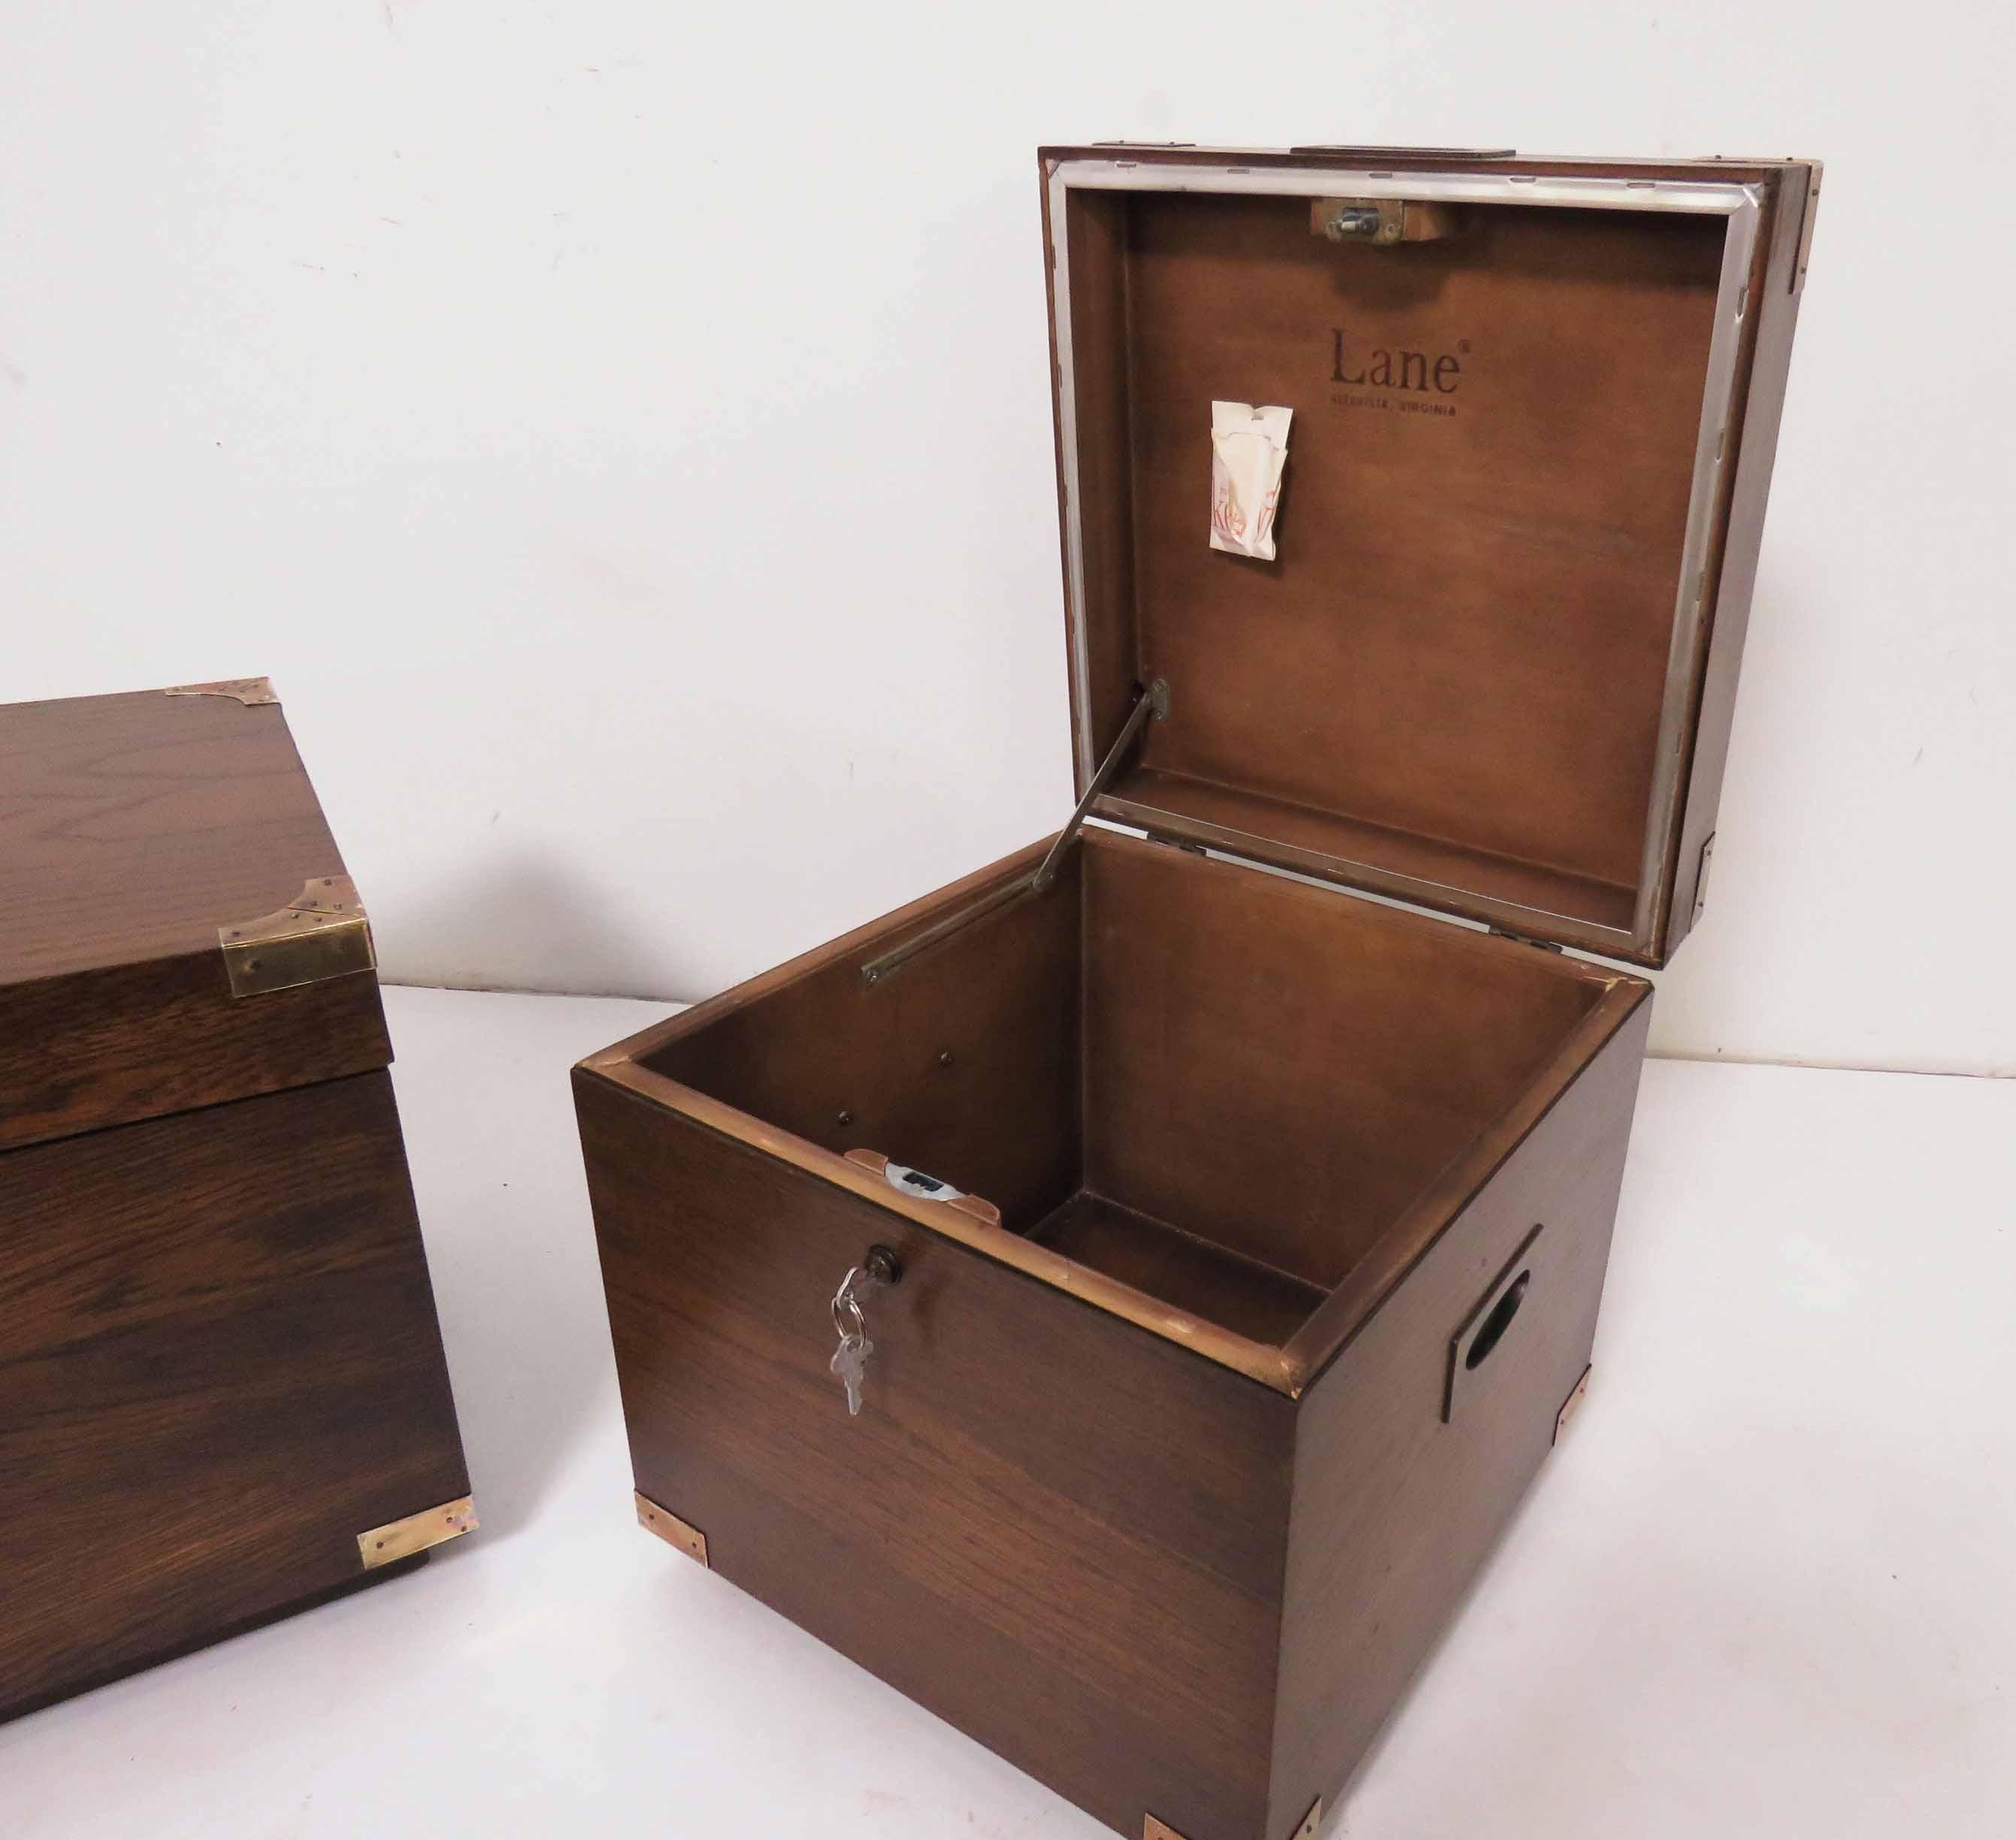 Pair of Midcentury Campaign Style Cube Form Chests by Lane Furniture 4